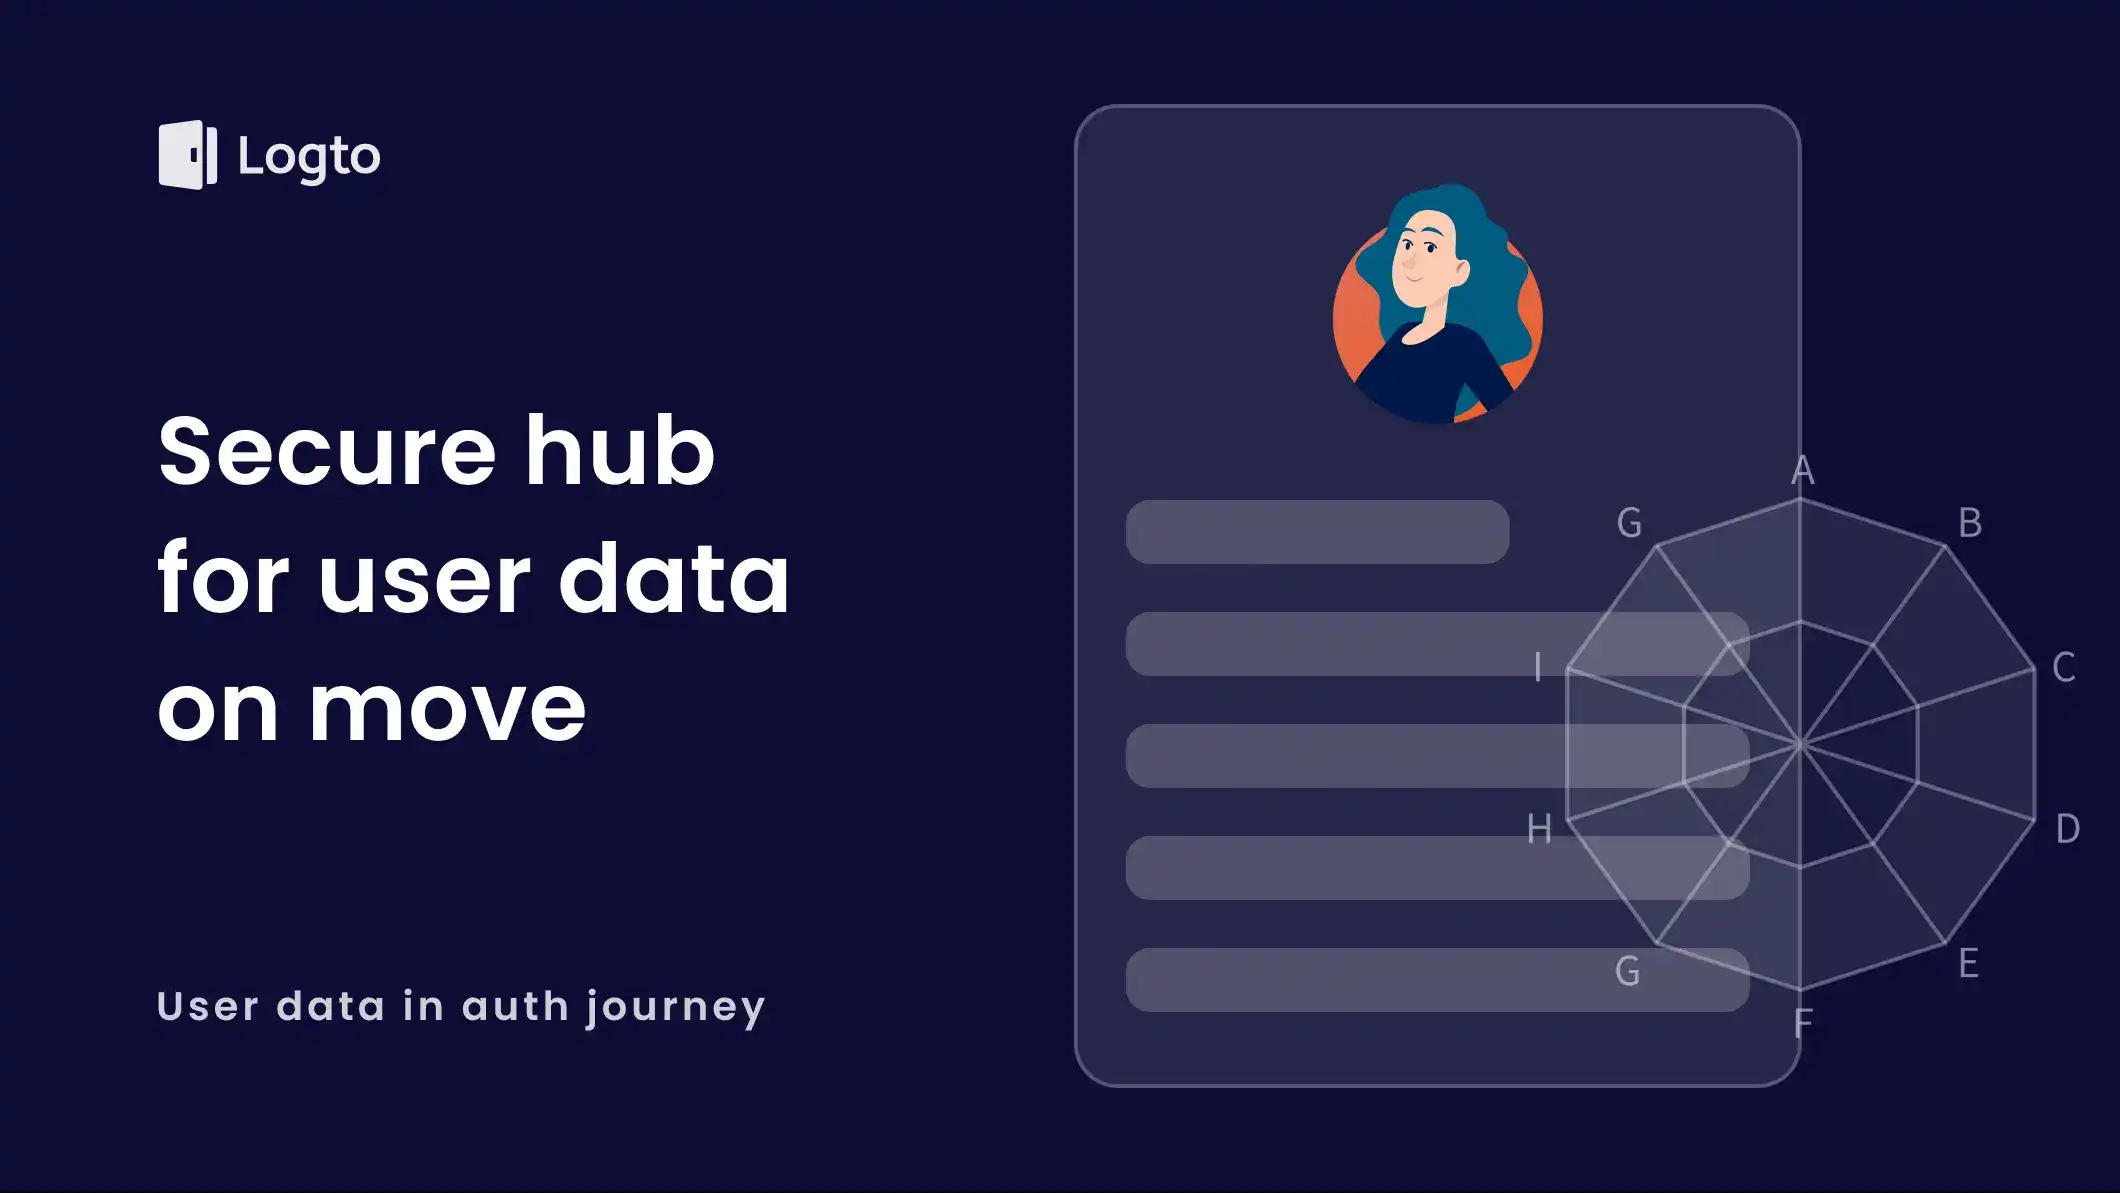 Secure hub for user data on move